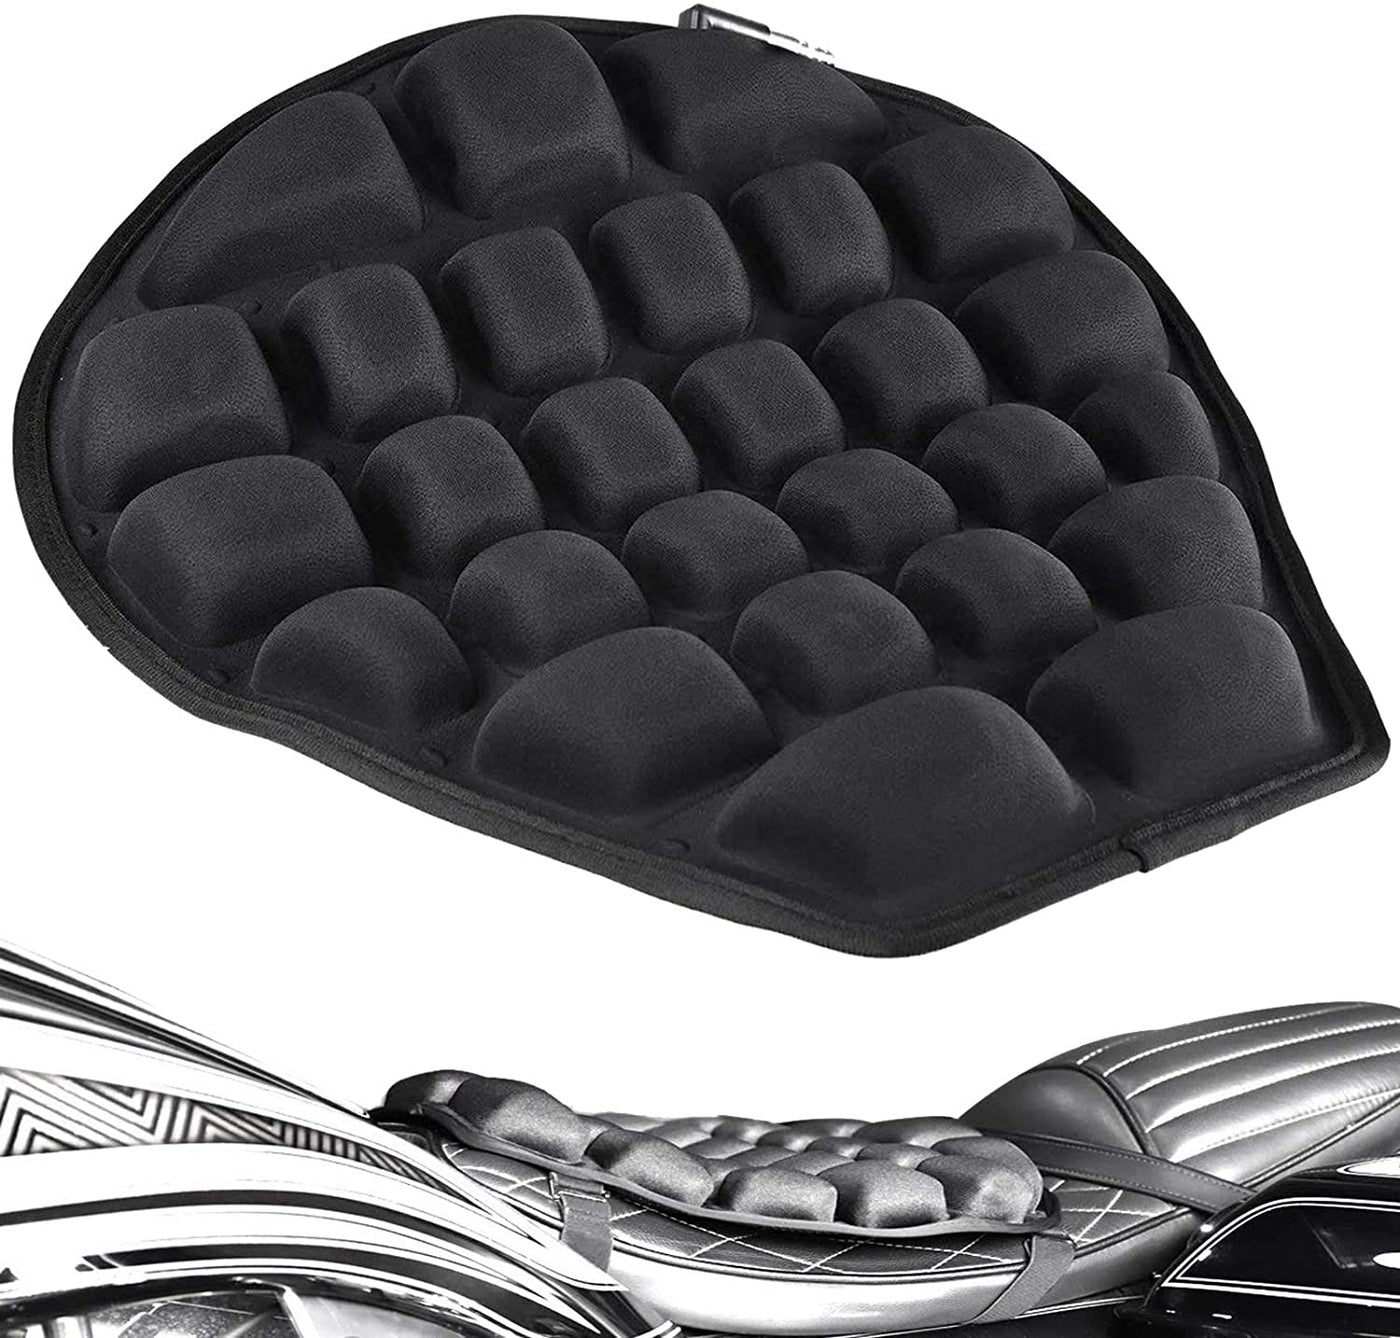 An image of a Motorcycle Seat Cushion Pad with cool down technology and pressure relief.